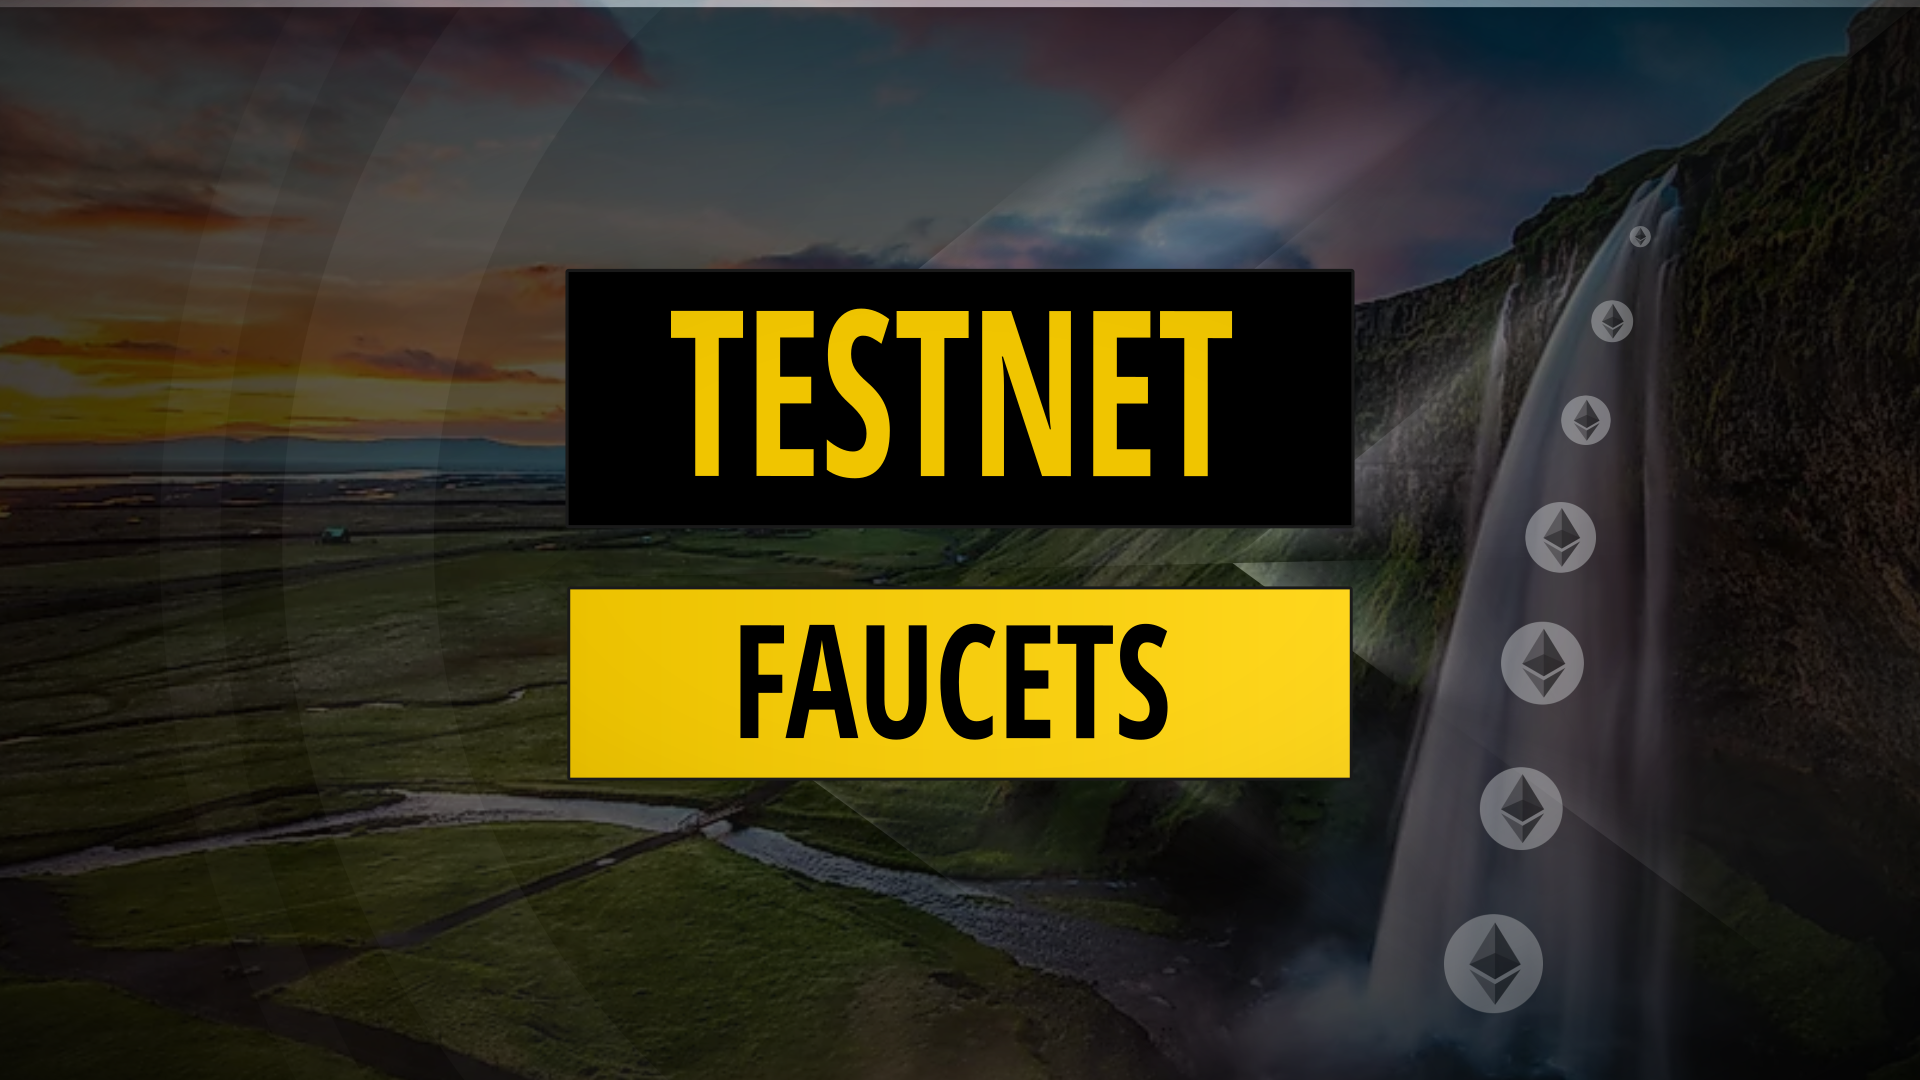 Testnet Faucets | 13 Testnet Details Including Ethereum, BSC, Polygon, Avalanche, Solana & Bitcoin